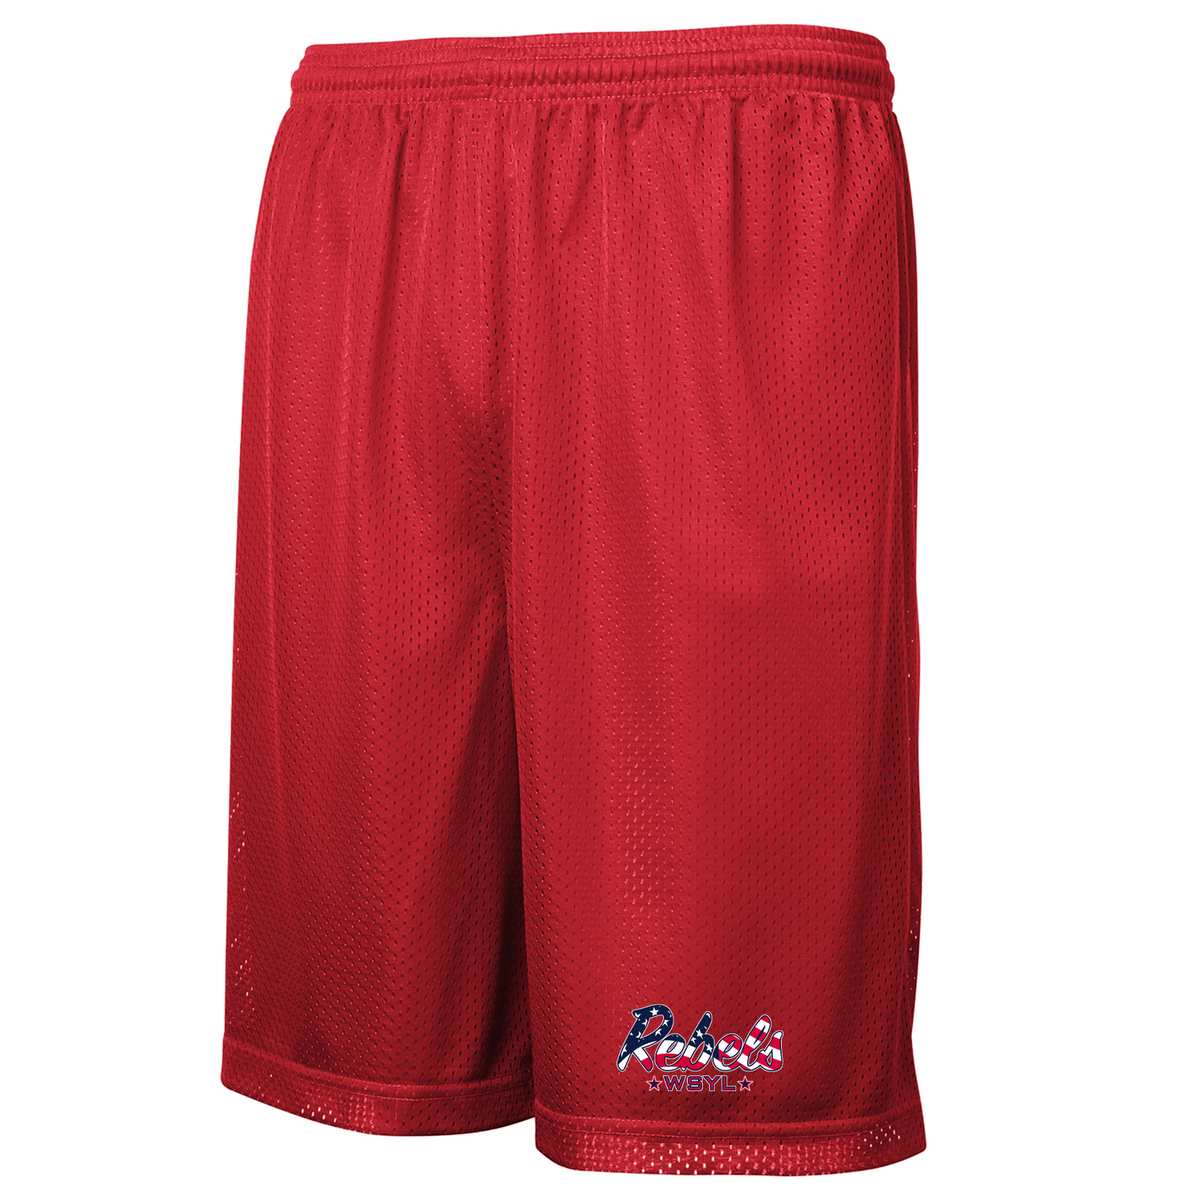 Rebels World Series Youth League Classic Mesh Shorts